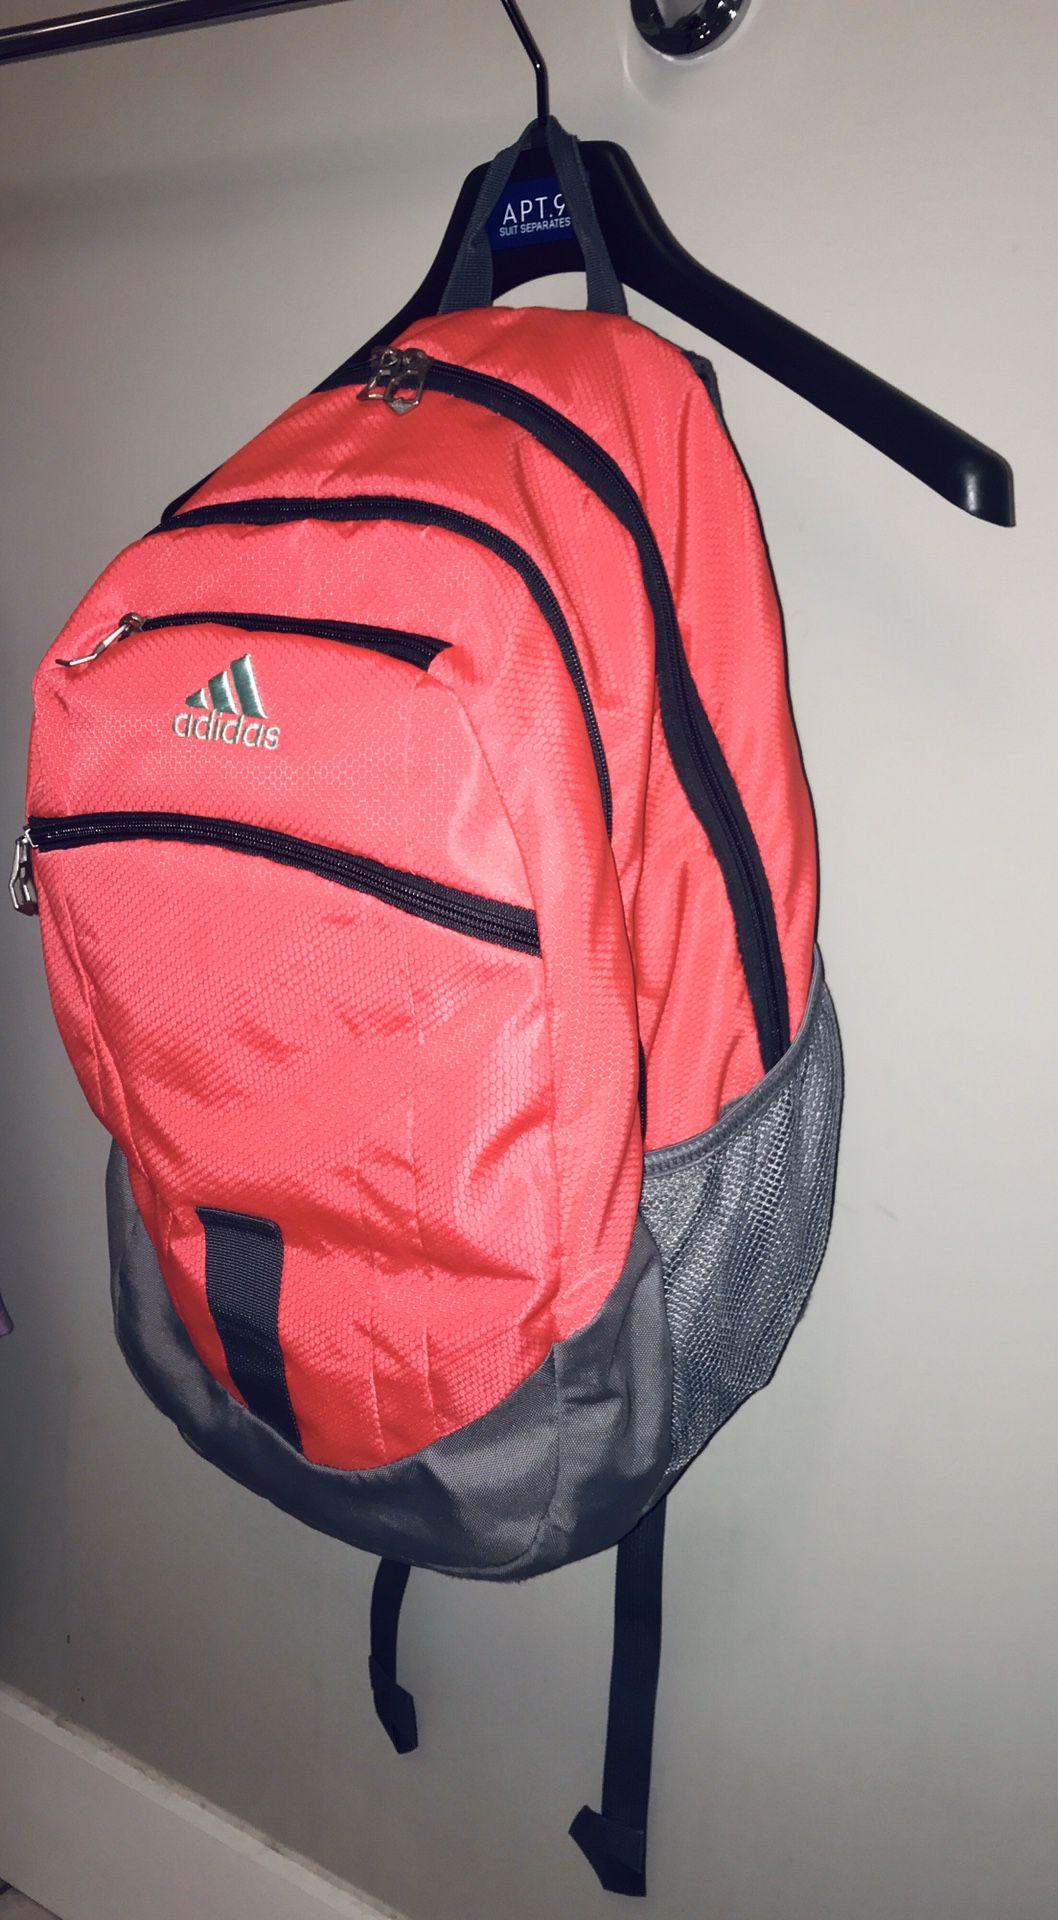 ADIDAS Peach/Pink Reflective & VERY Adjustable Large Adidas Backpack—like new, very gently used! See description for more info 🎒💕💖